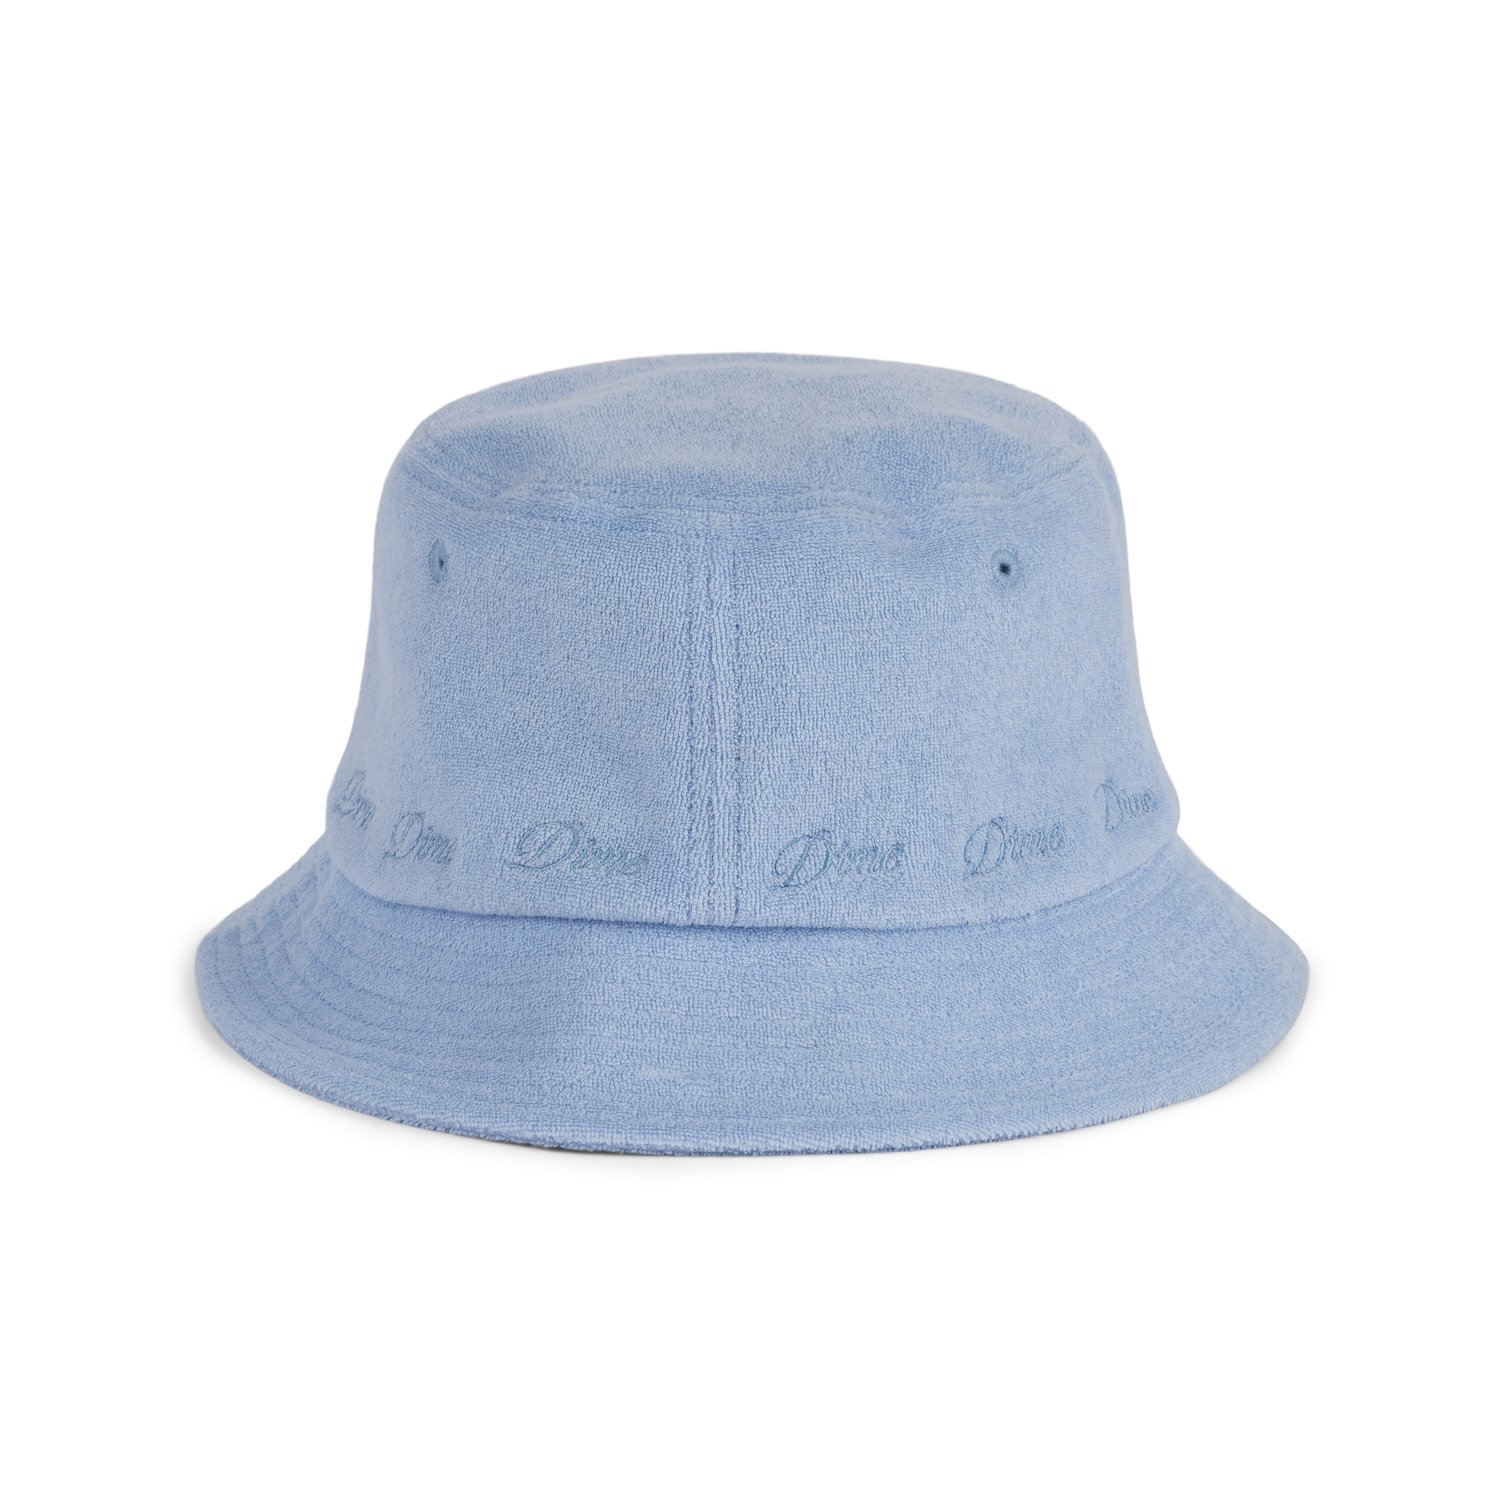 DIME<br>Terry Cloth Bucket Hat<br>